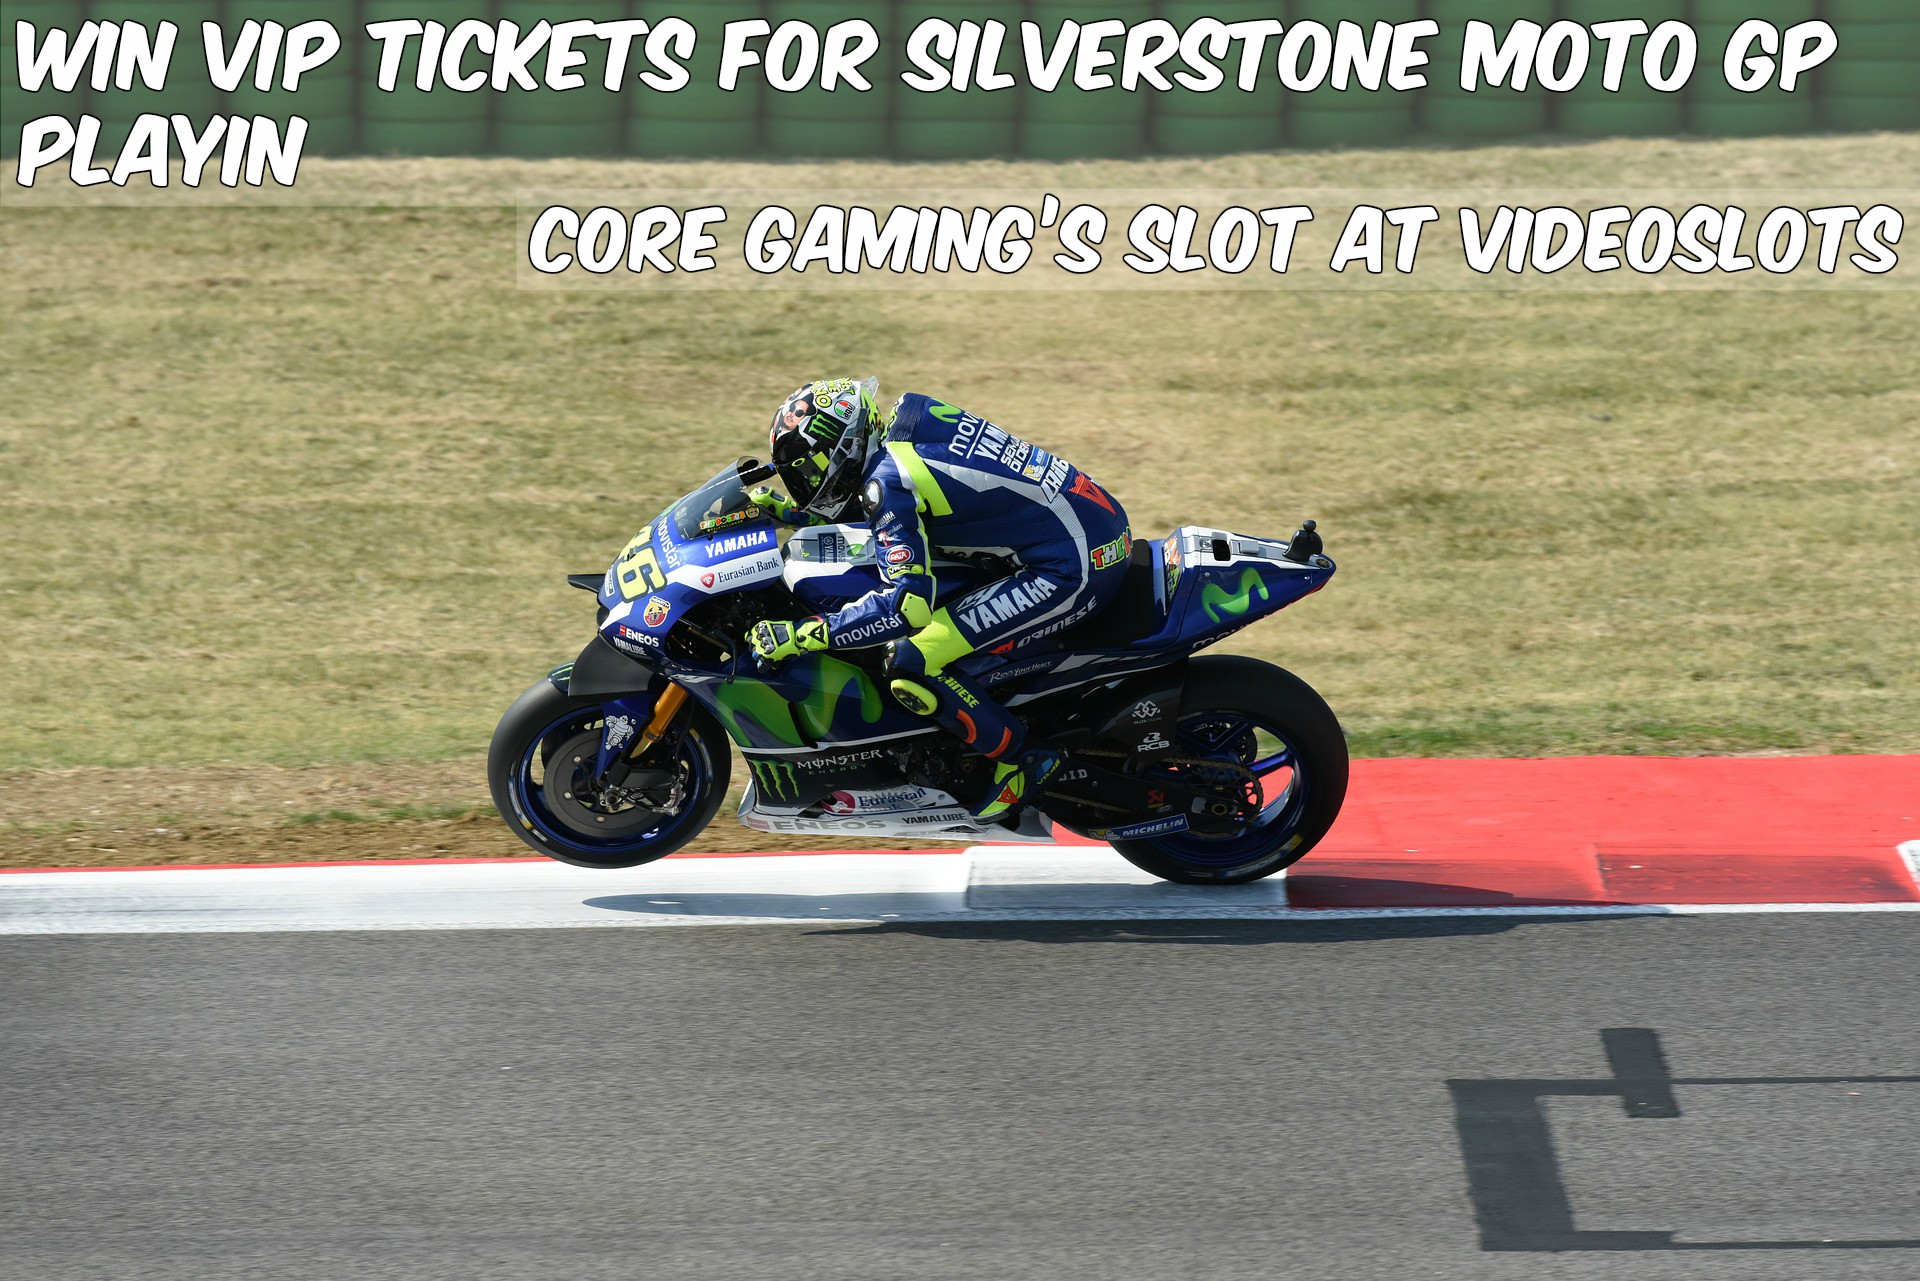 Win VIP Tickets for Silverstone Moto GP Playing Core Gaming’s Slot at VideoSlots